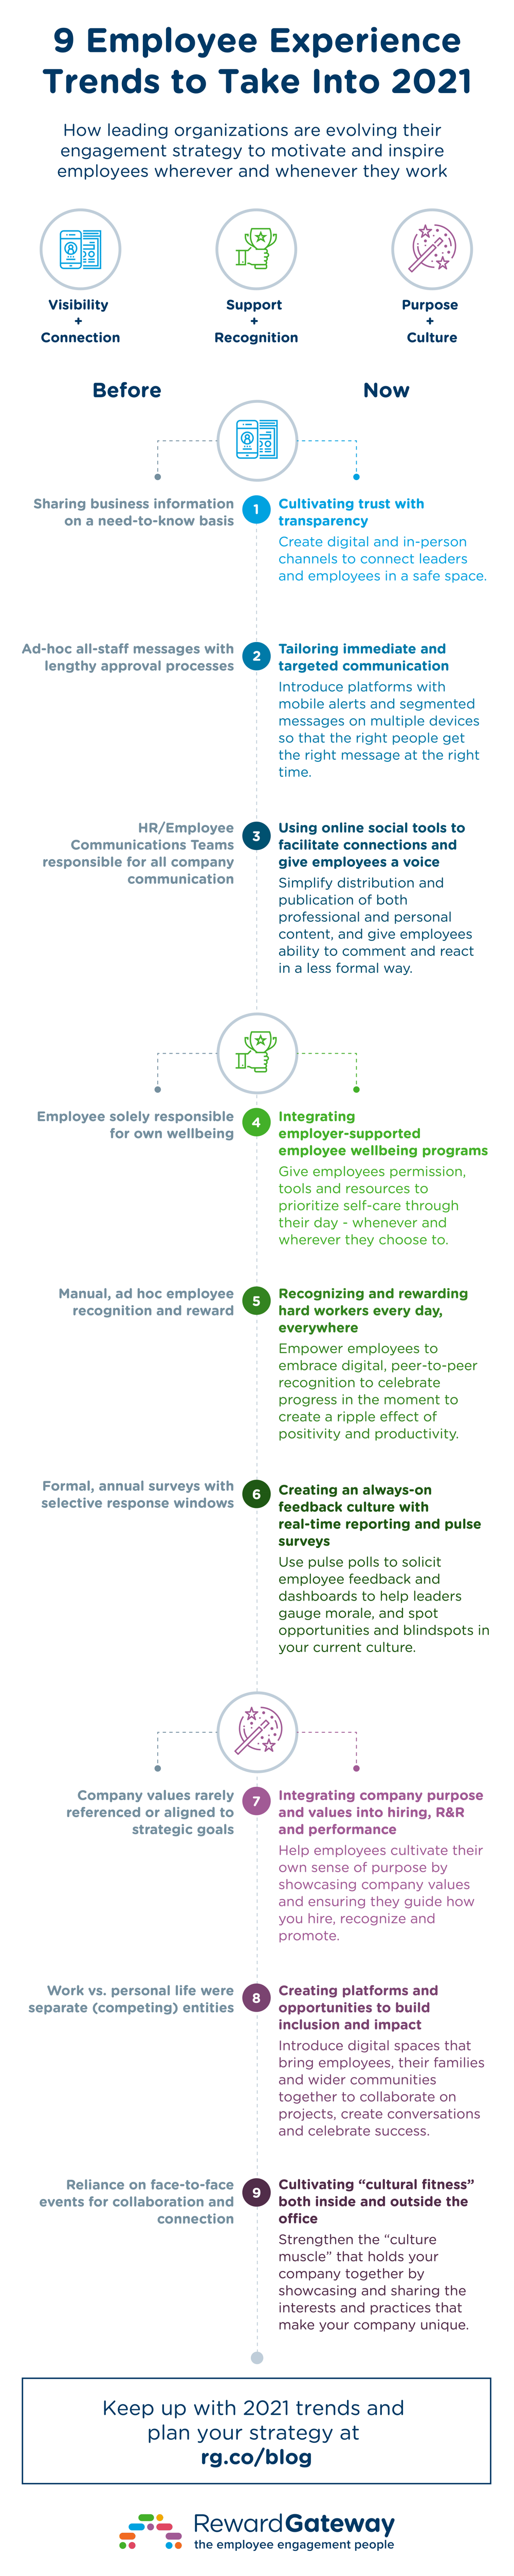 us-infographic-9-employee-experience-trends